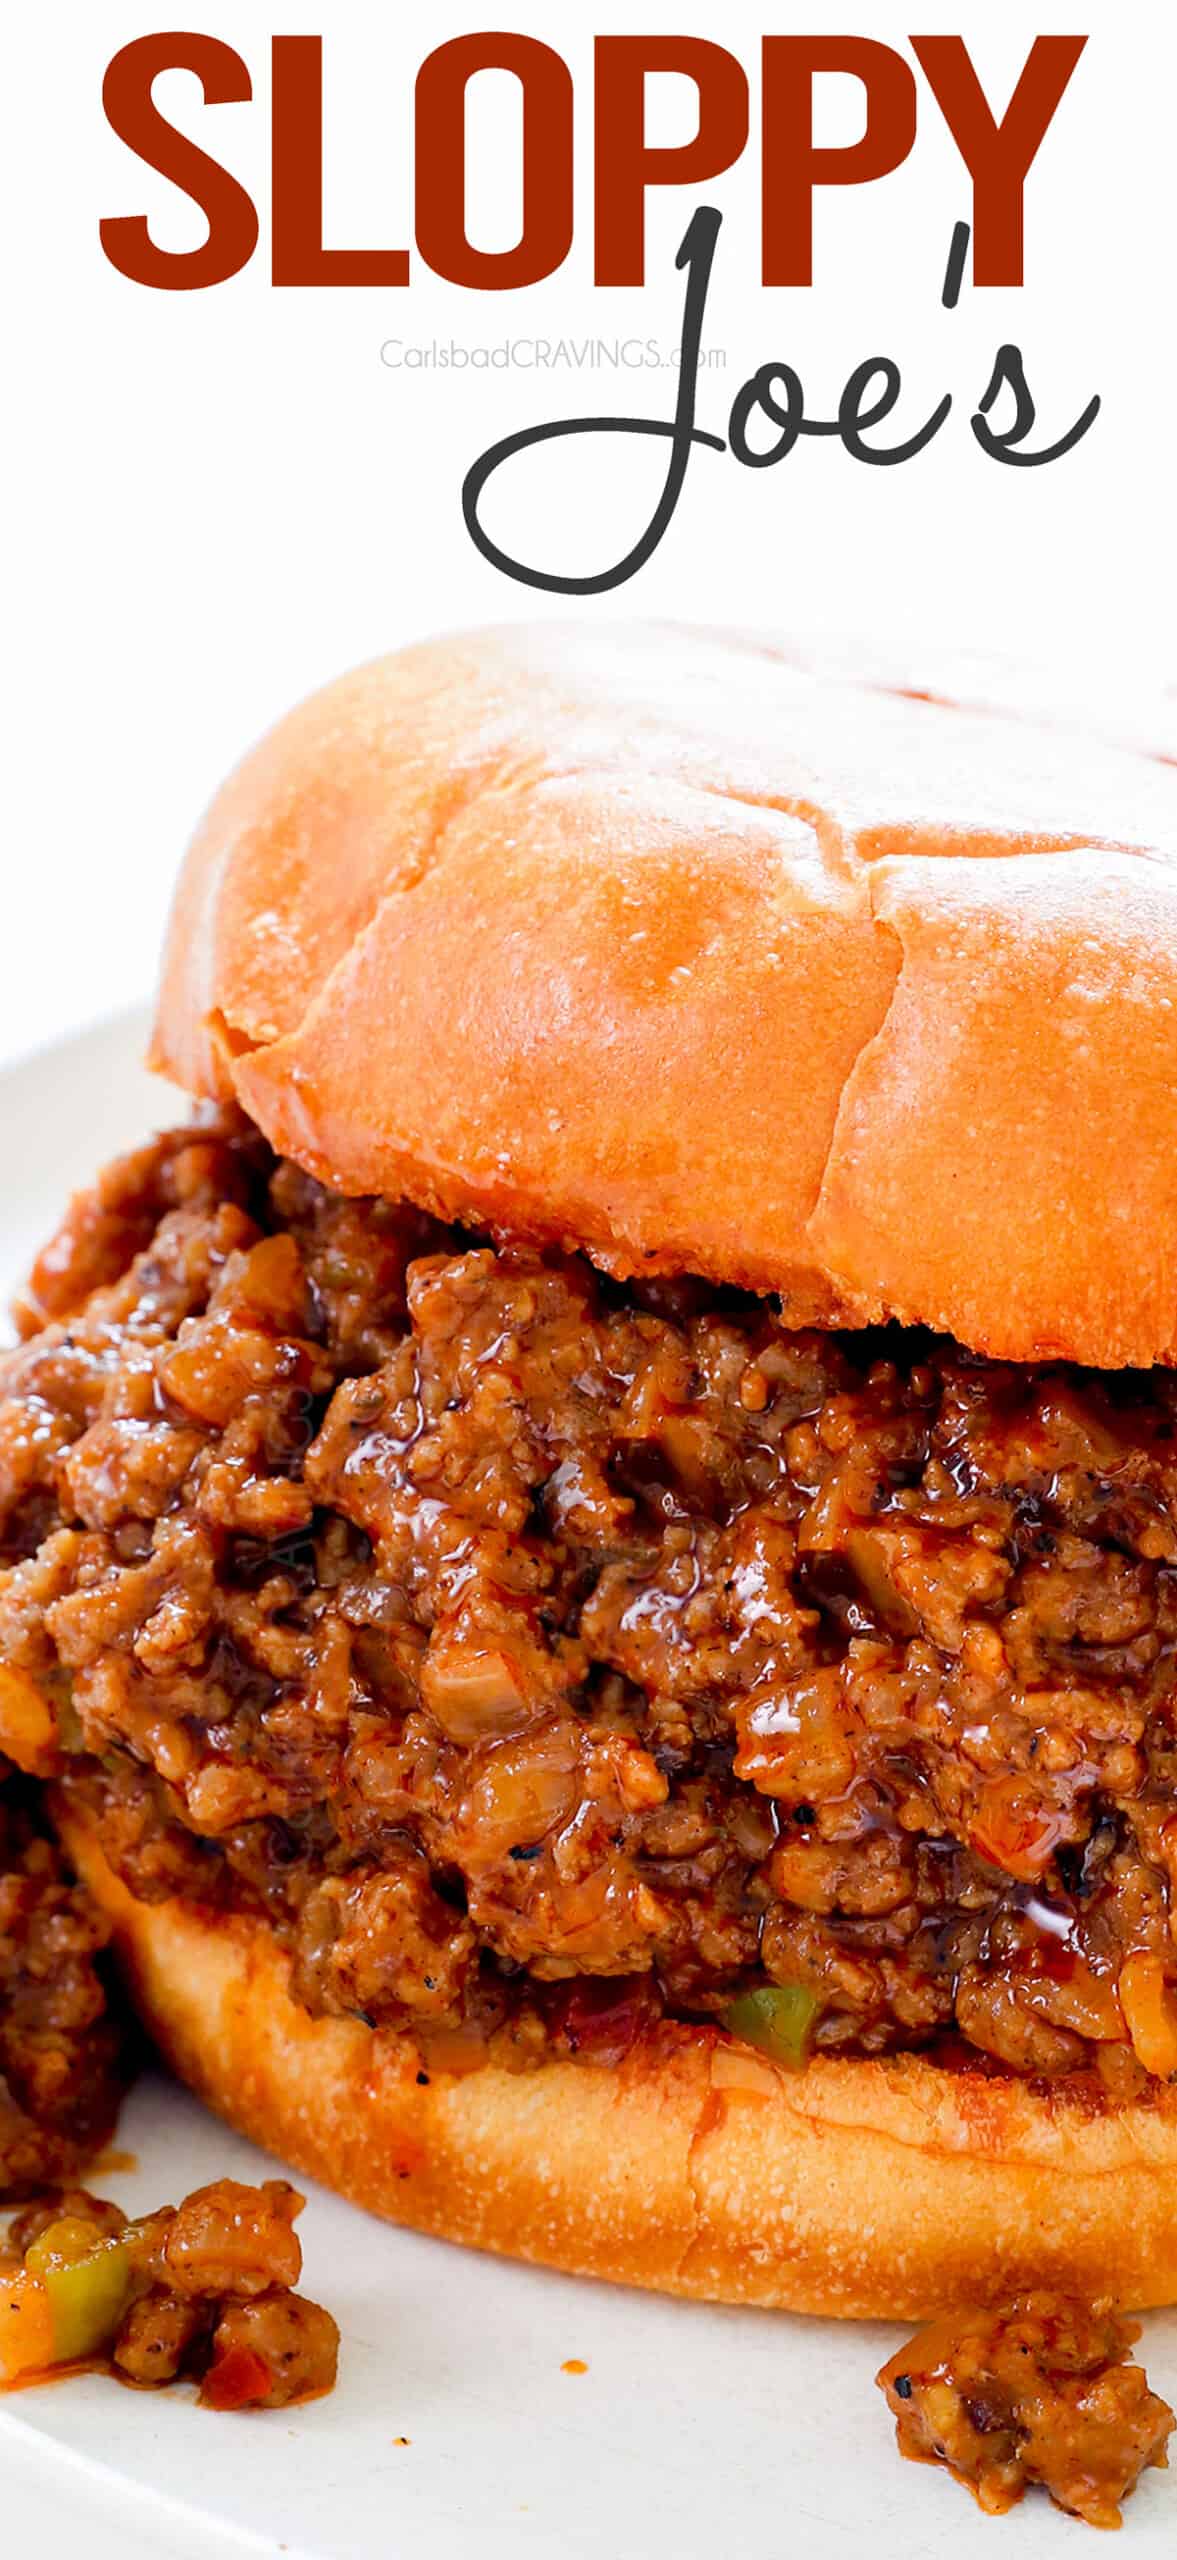 up close of Sloppy Joe recipe showing how juicy the meat is on a bun